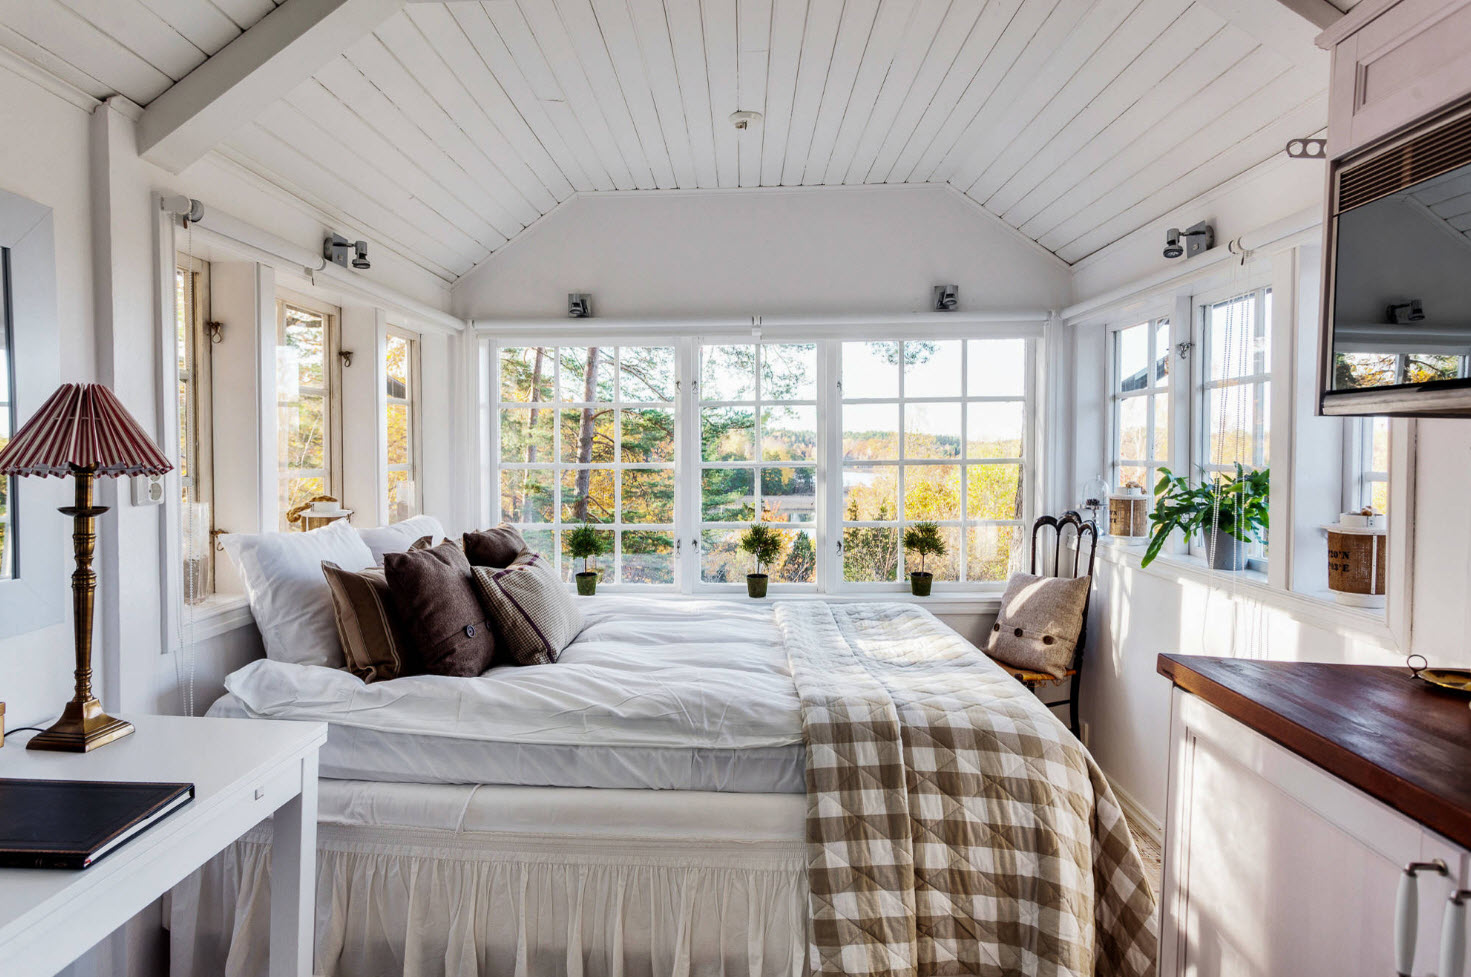 A pleasingly rustic bedroom with farmhouse touches and a bed.